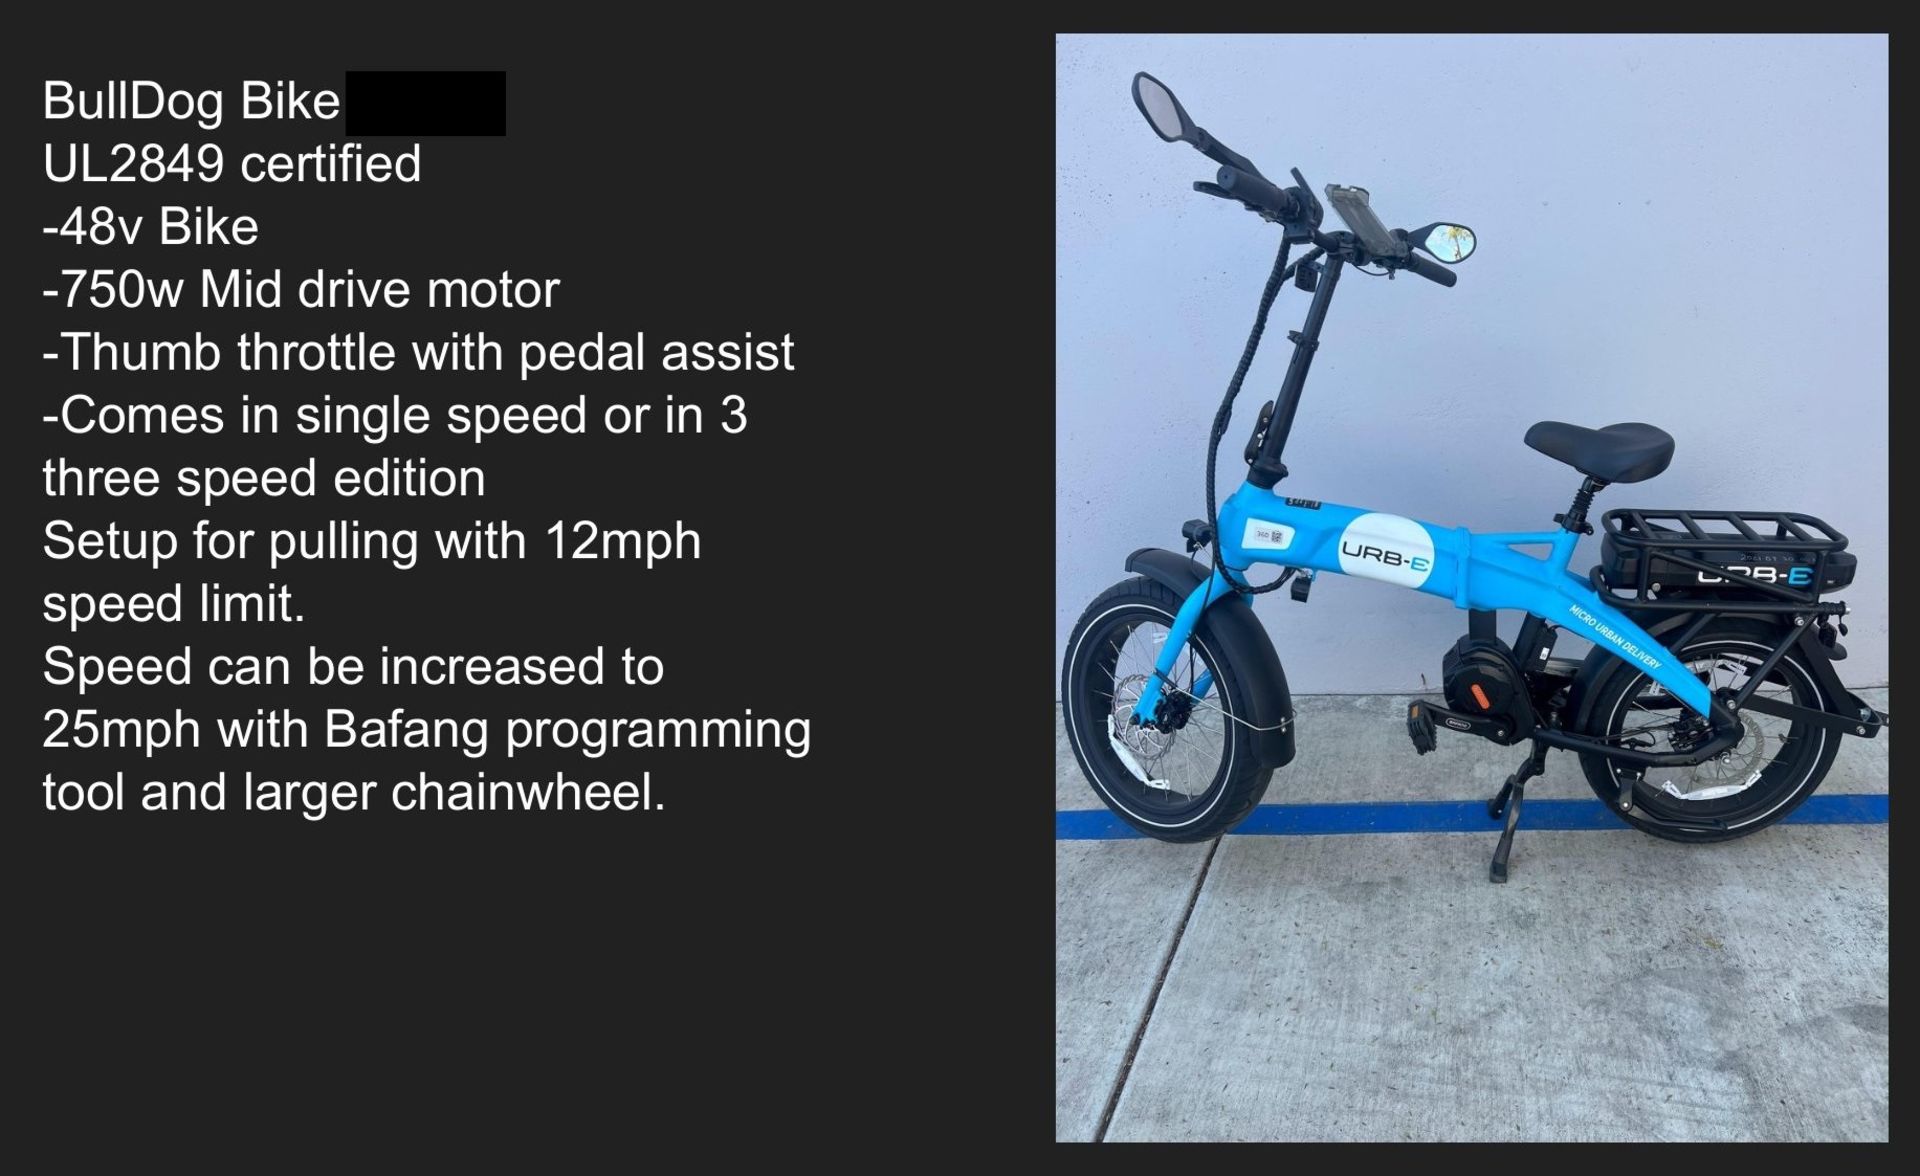 URB-E ELECTRIC DELIVERY BIKE, NEW, 750W MID DRIVE MOTOR, SINGLE SPEED, THUMB THROTTLE WITH PEDAL - Image 7 of 7